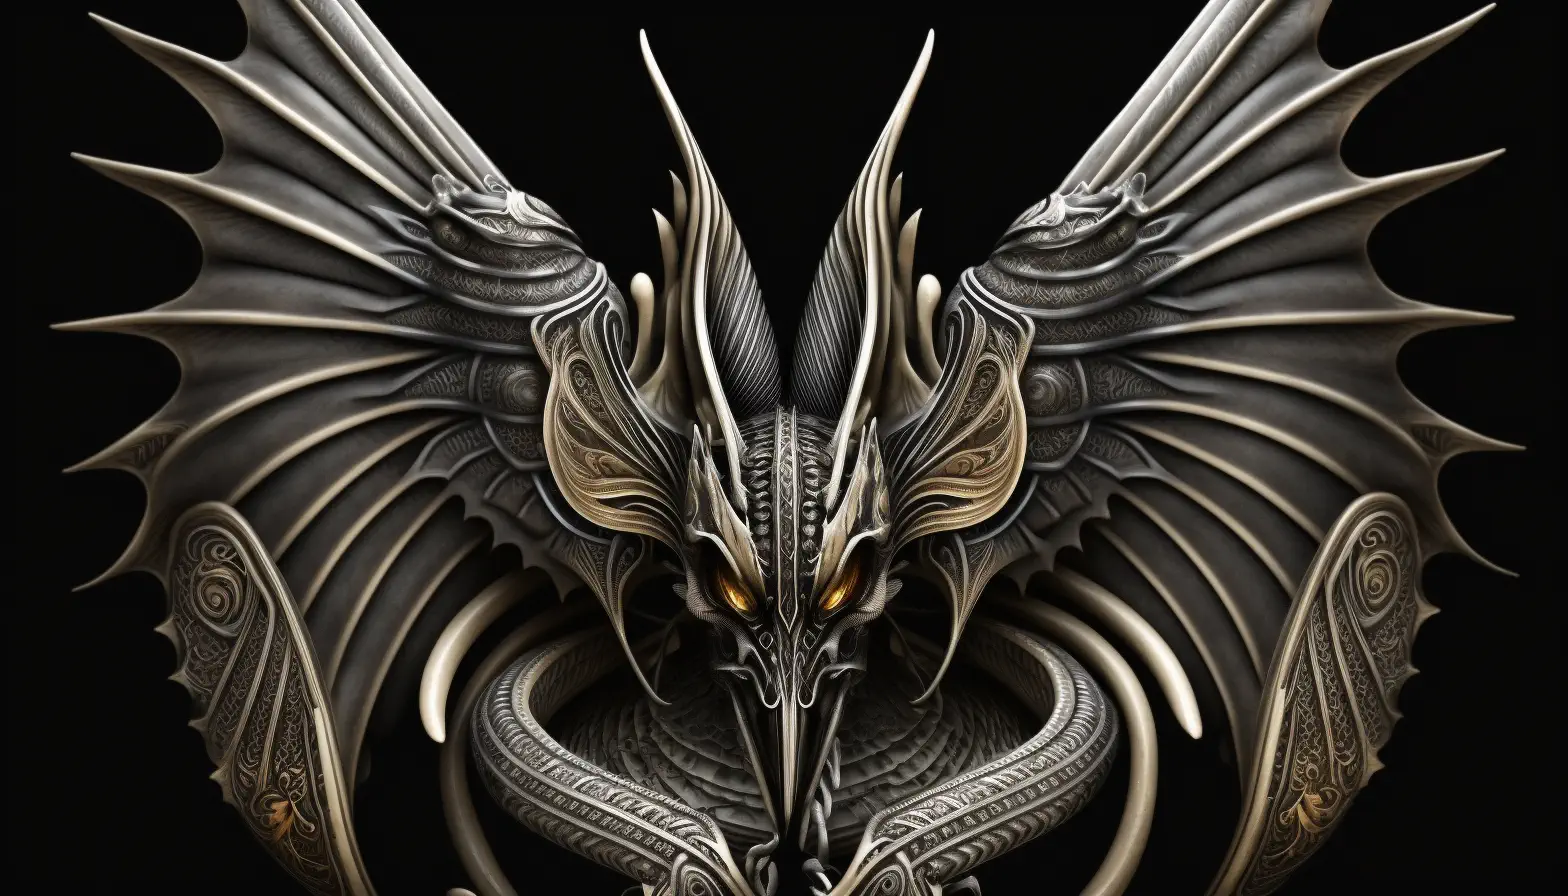 WingedOne_two-winged_fantasy_dragon_in_H.R._Giger_style_7fc03a2a-cc8e-4373-a4d8-e98598e2a579